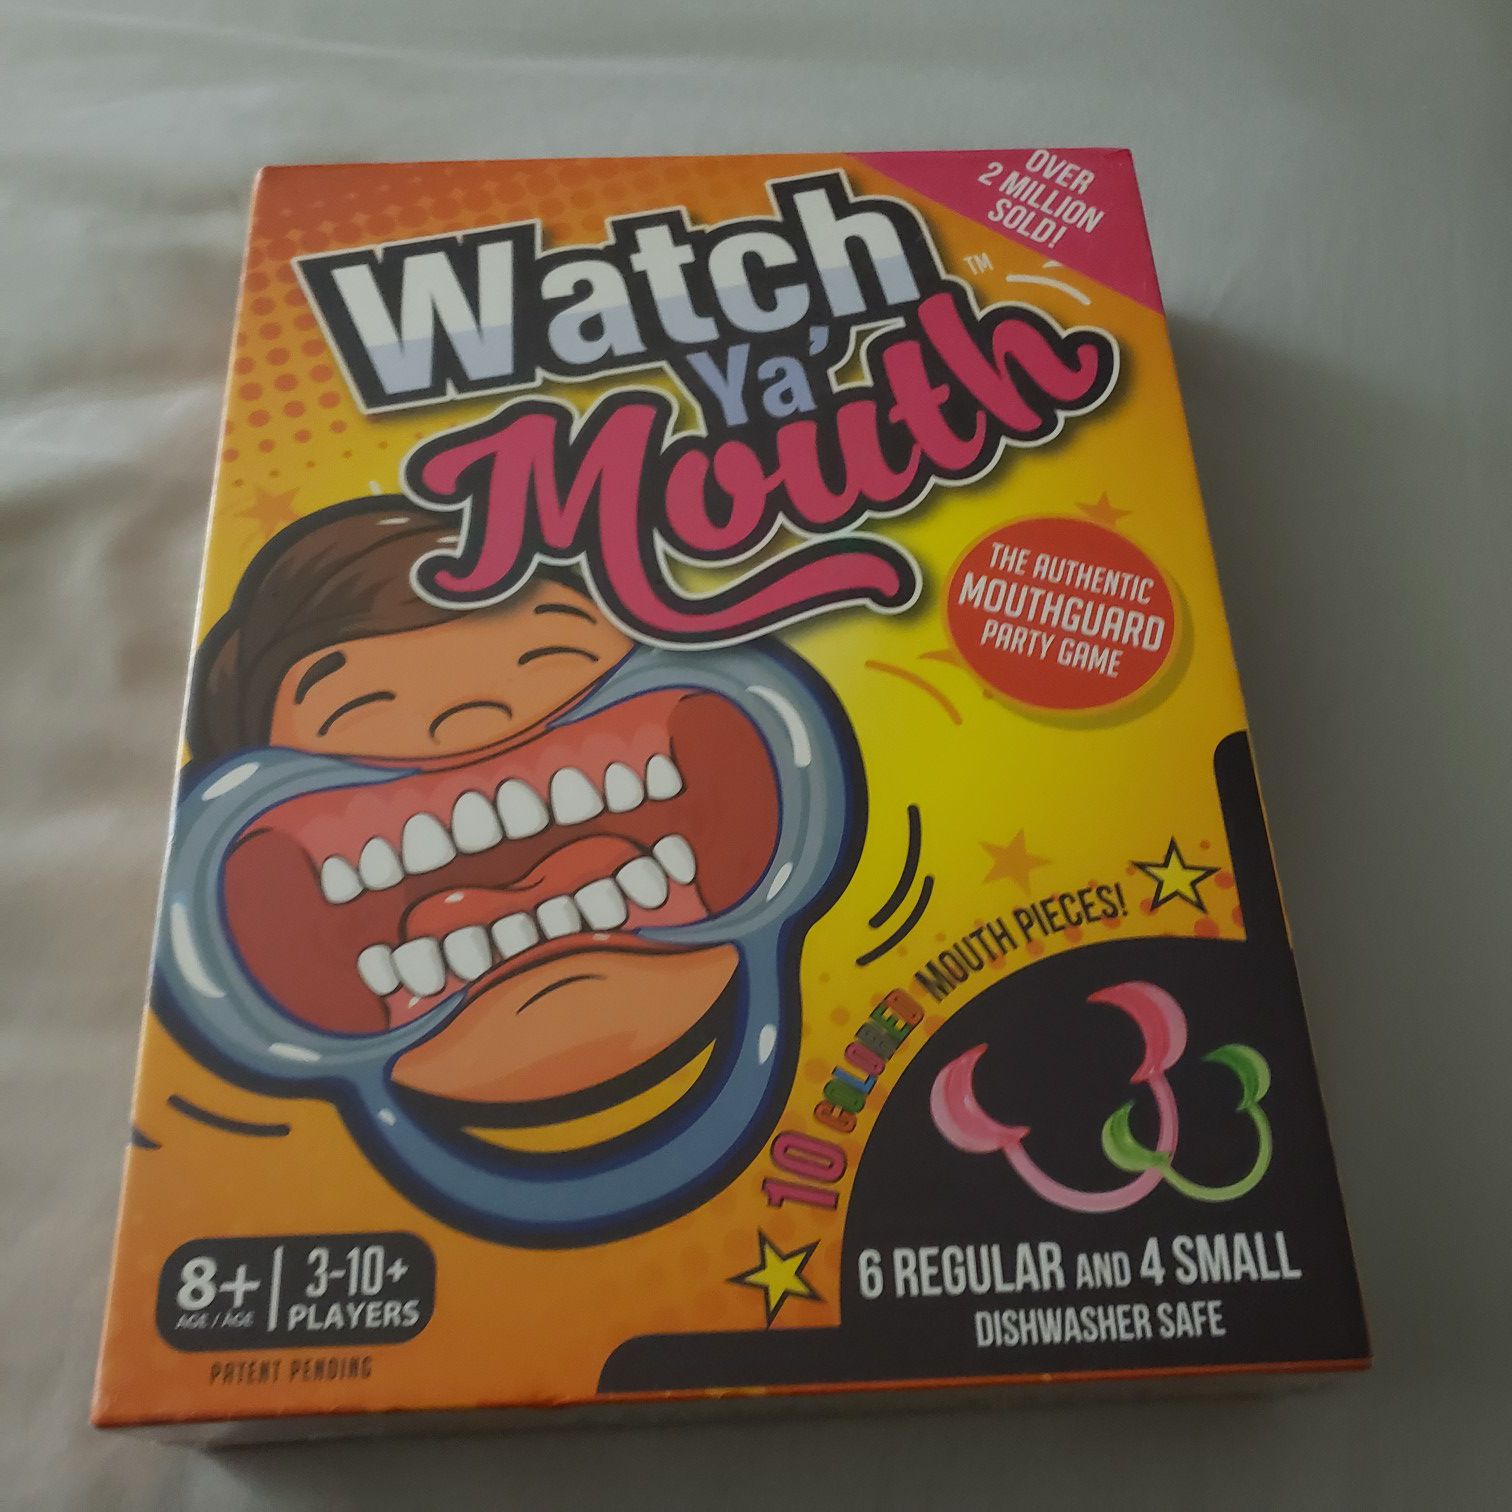 Watch your mouth board game